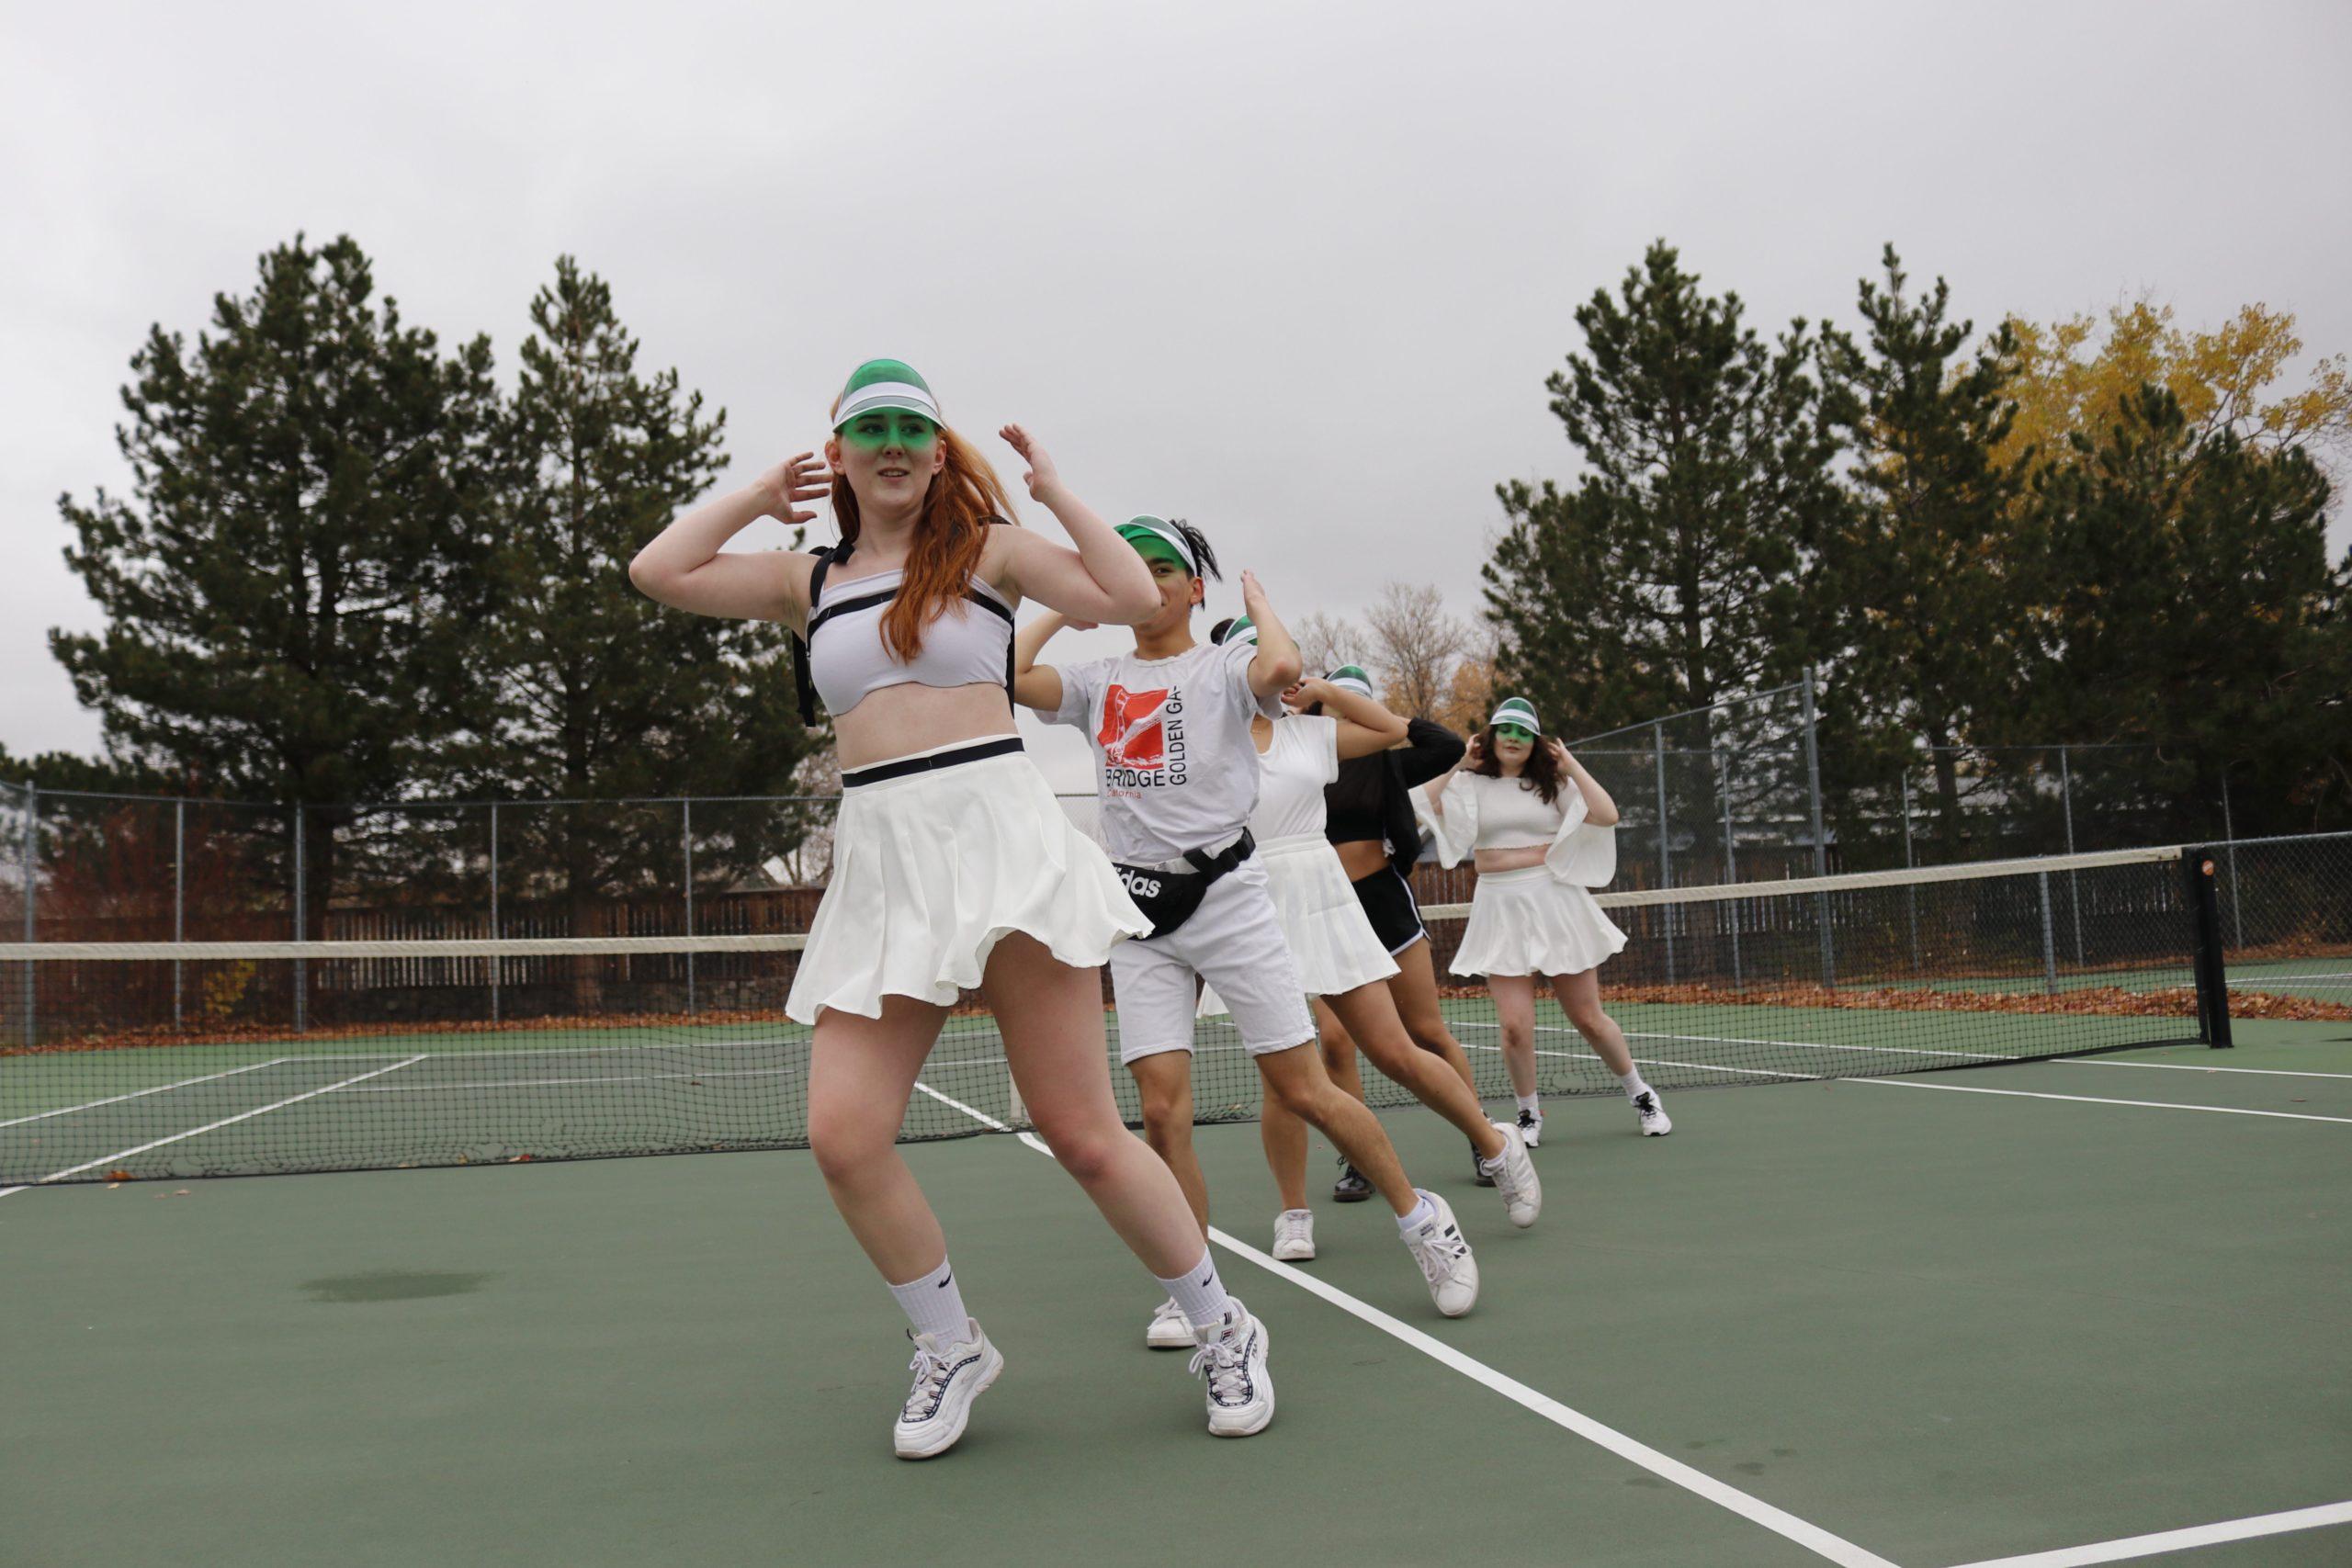 dancers perform on a tennis court